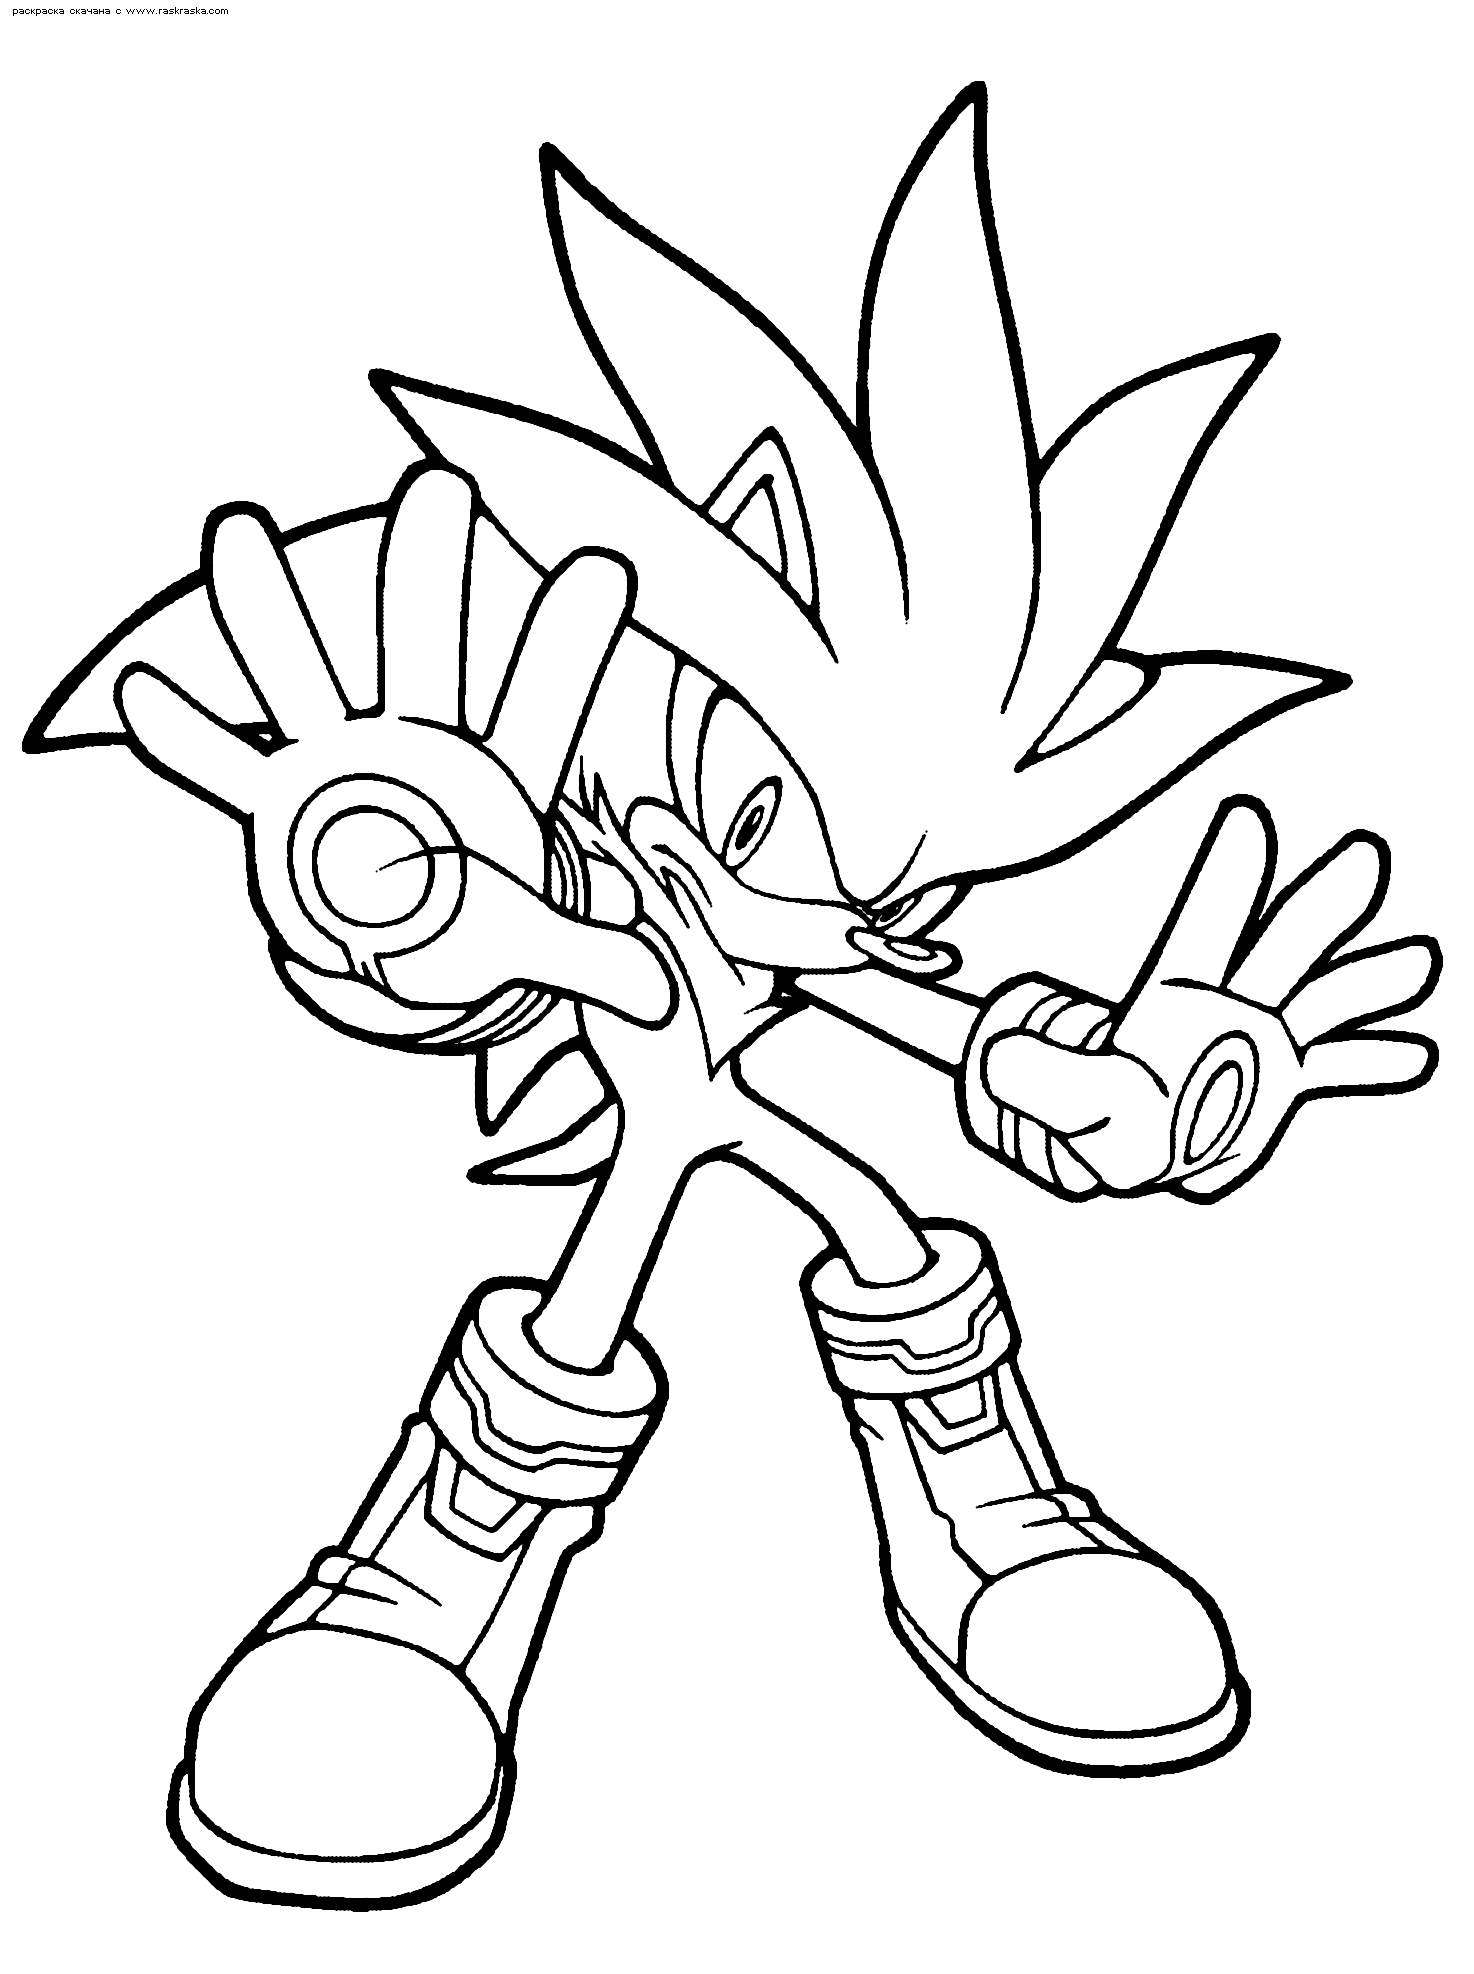 Sonic Coloring Pages (13) - Coloring Kids